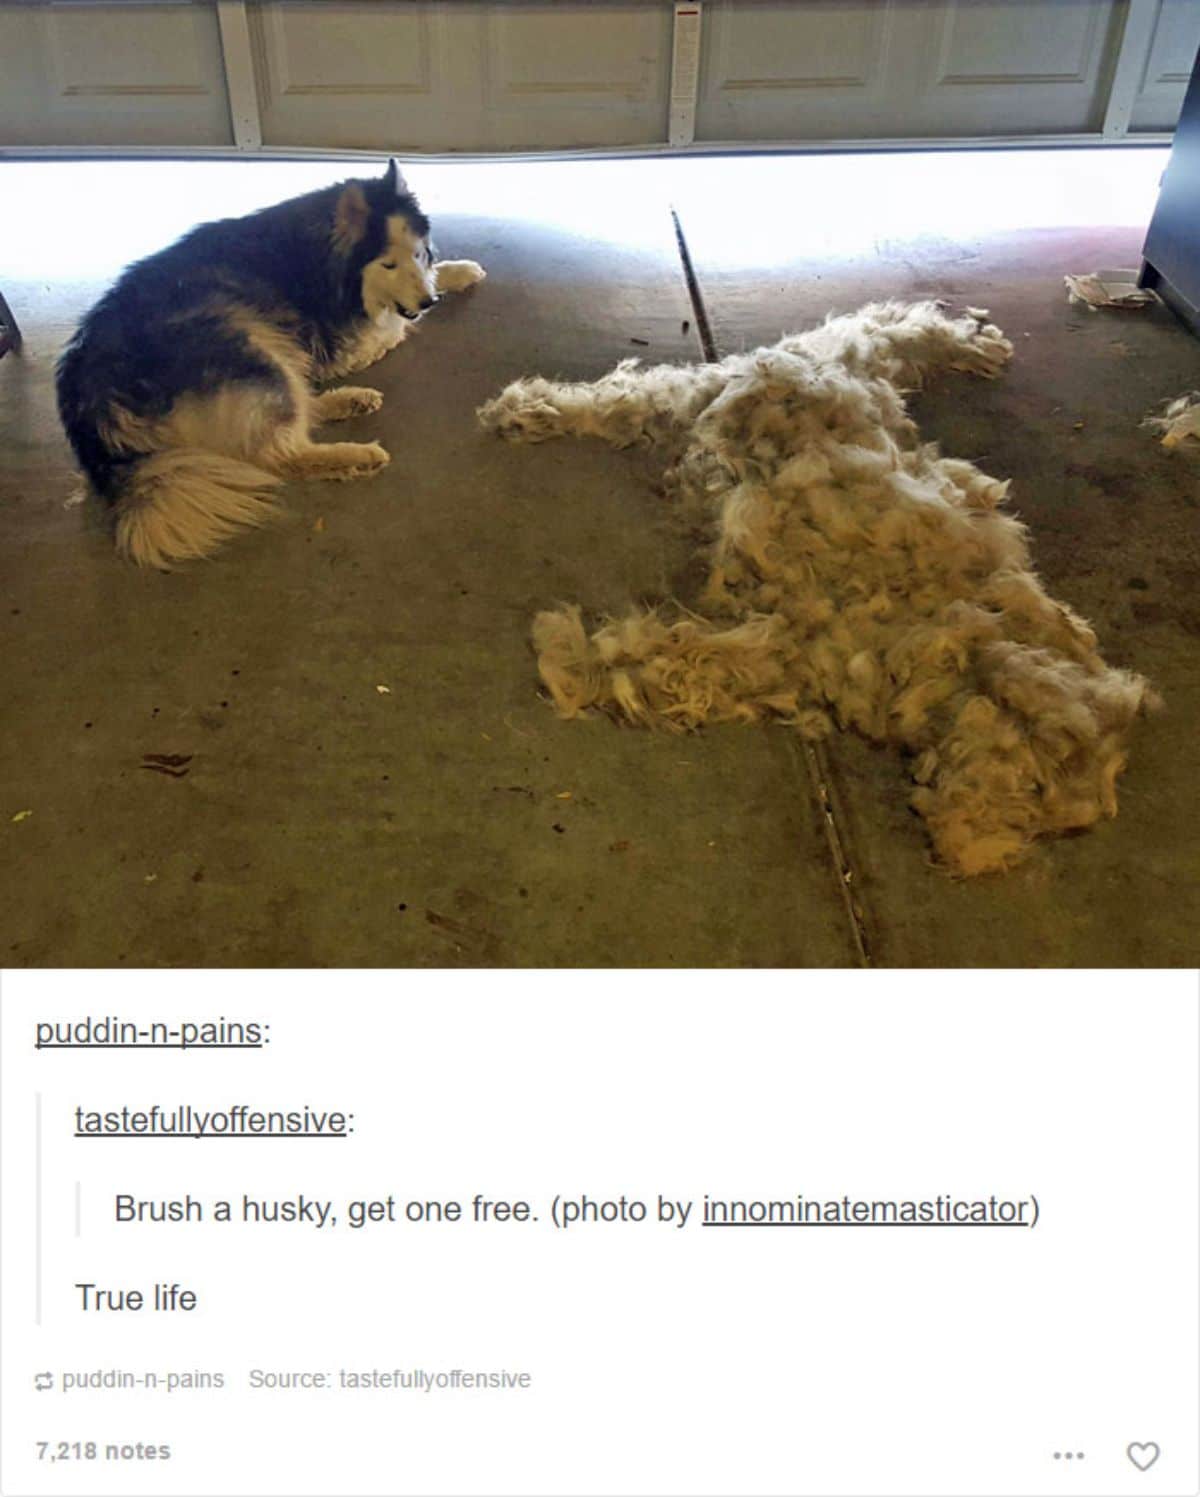 black and white husky on the floor in a garage next to a pile of dog fur arranged in the shape of a dog